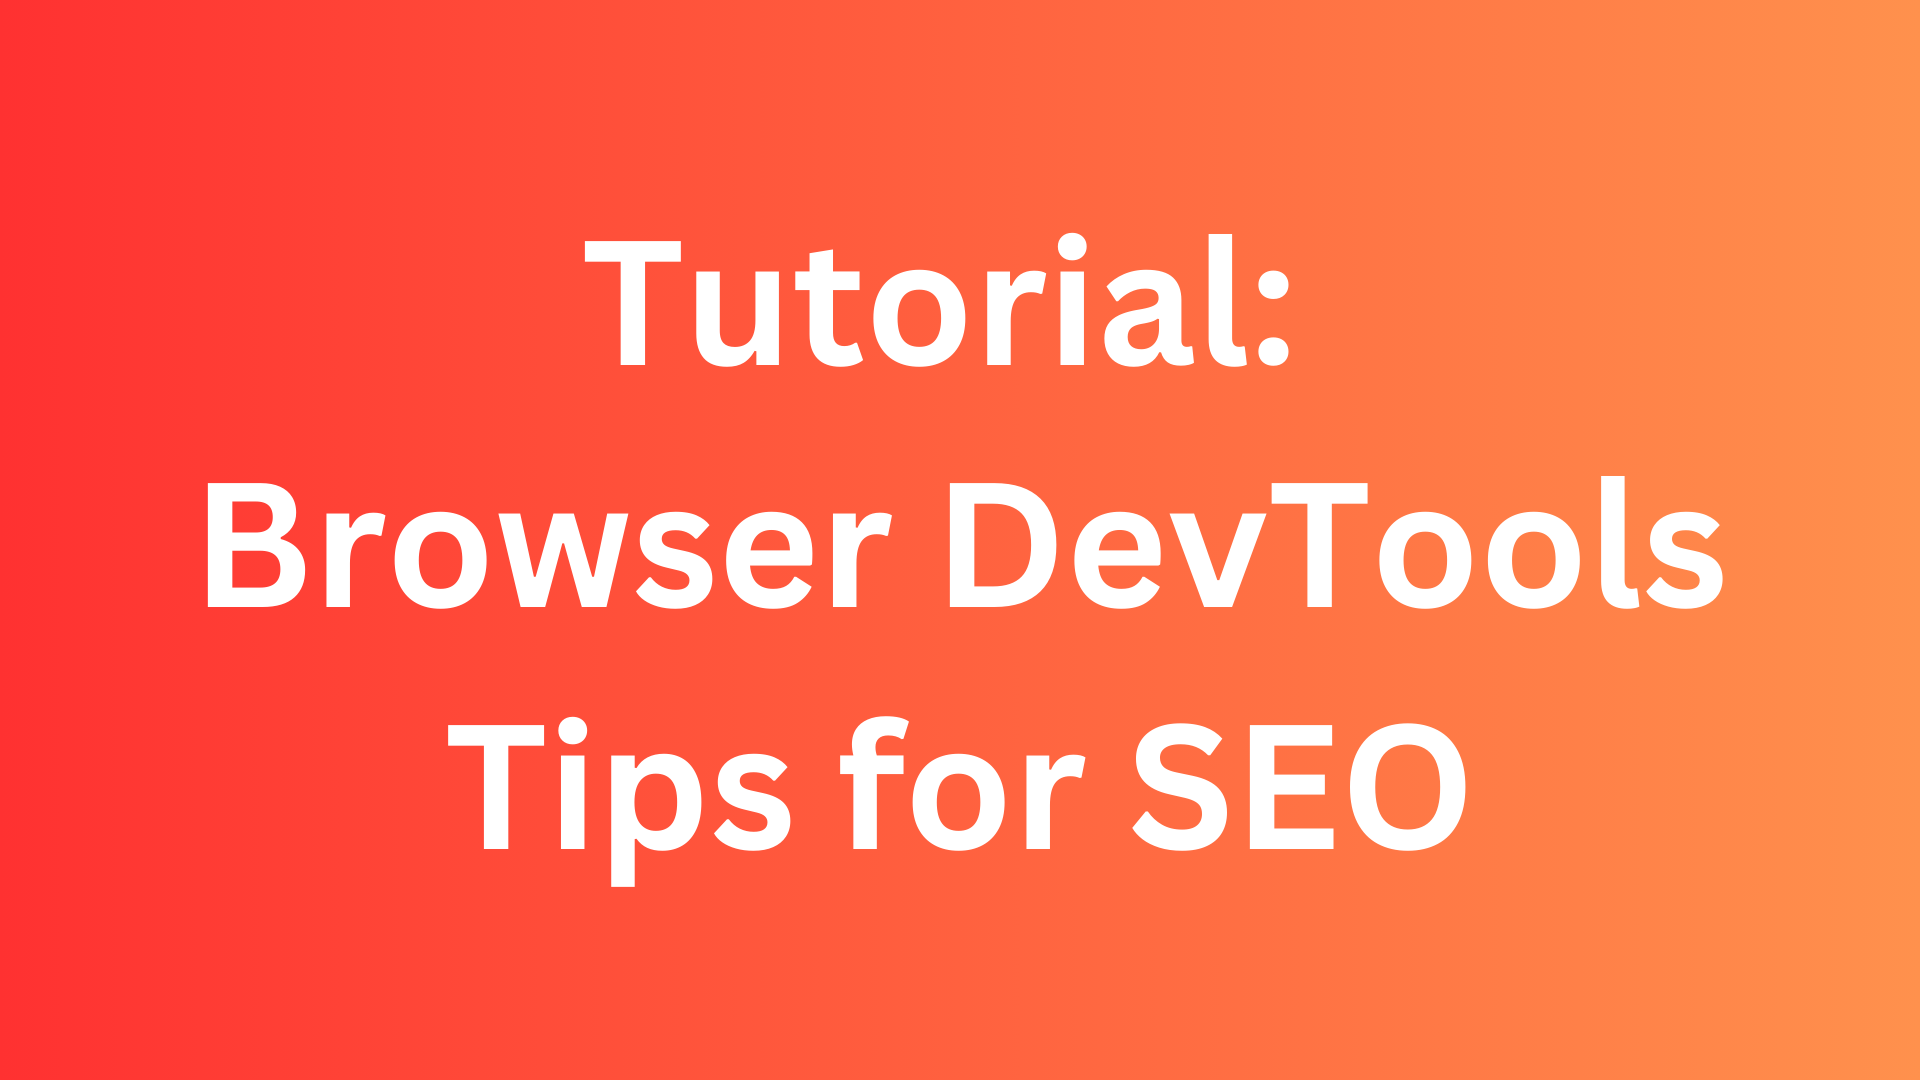 Tutorial for using the DevTools in your browser for SEO